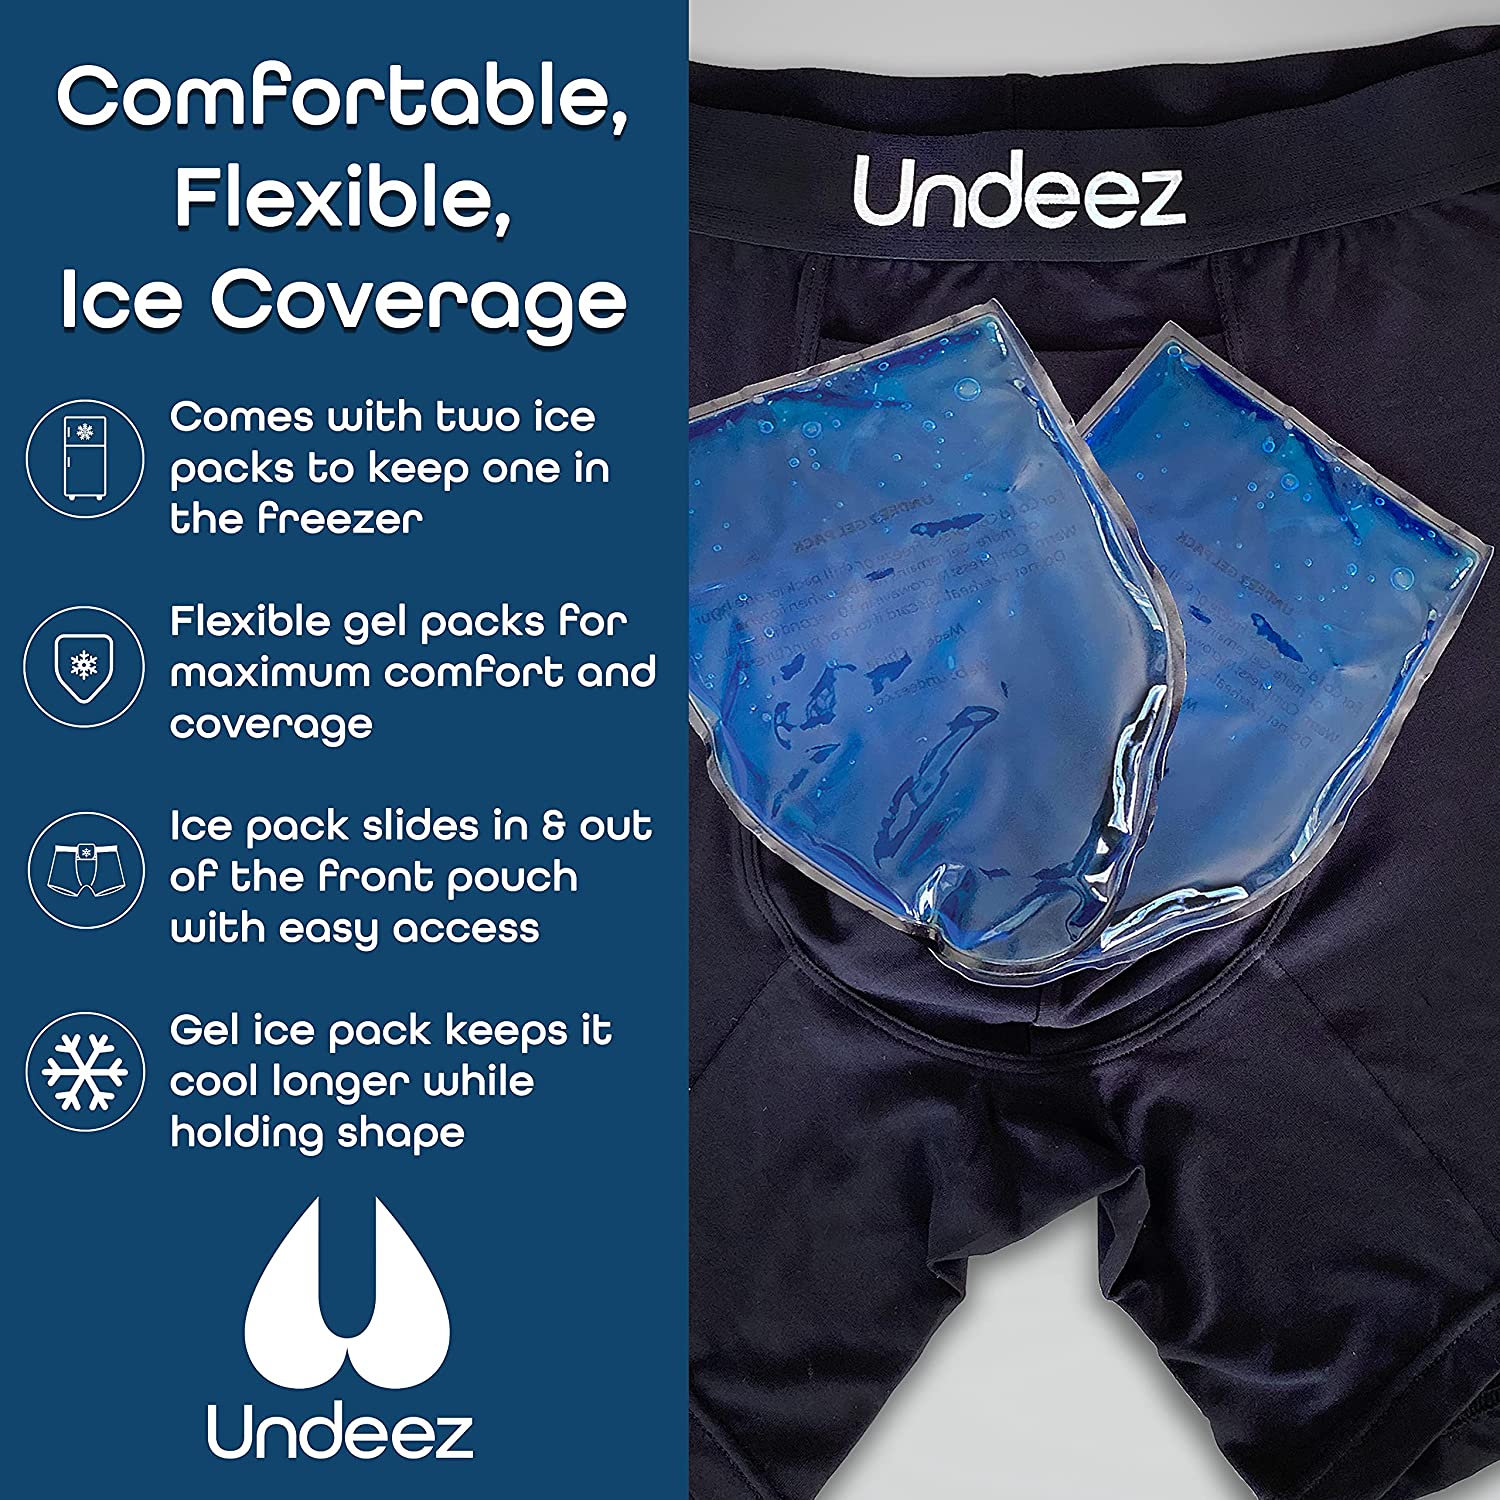 Undeez Vasectomy Jockstrap Underwear - With 2-Custom Fit Ice Packs and Snug  Jockstrap For Testicular Support & Pain Relief (as1, alpha, m, regular,  regular) Black at  Men's Clothing store